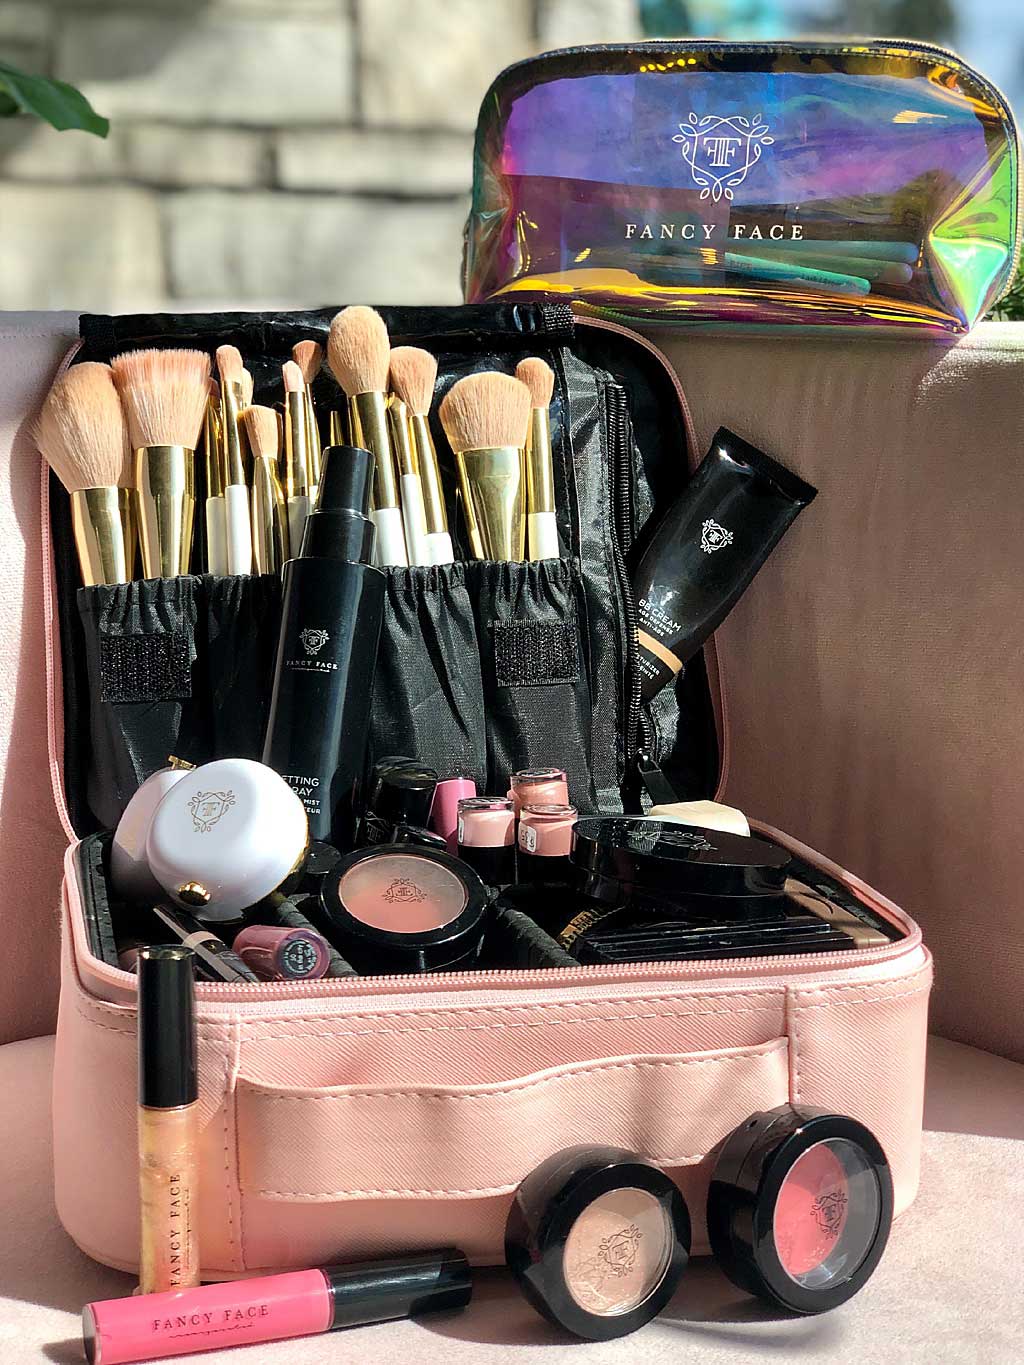 Spring Clean Your Makeup Bag and 5 Must-Have Products for Spring